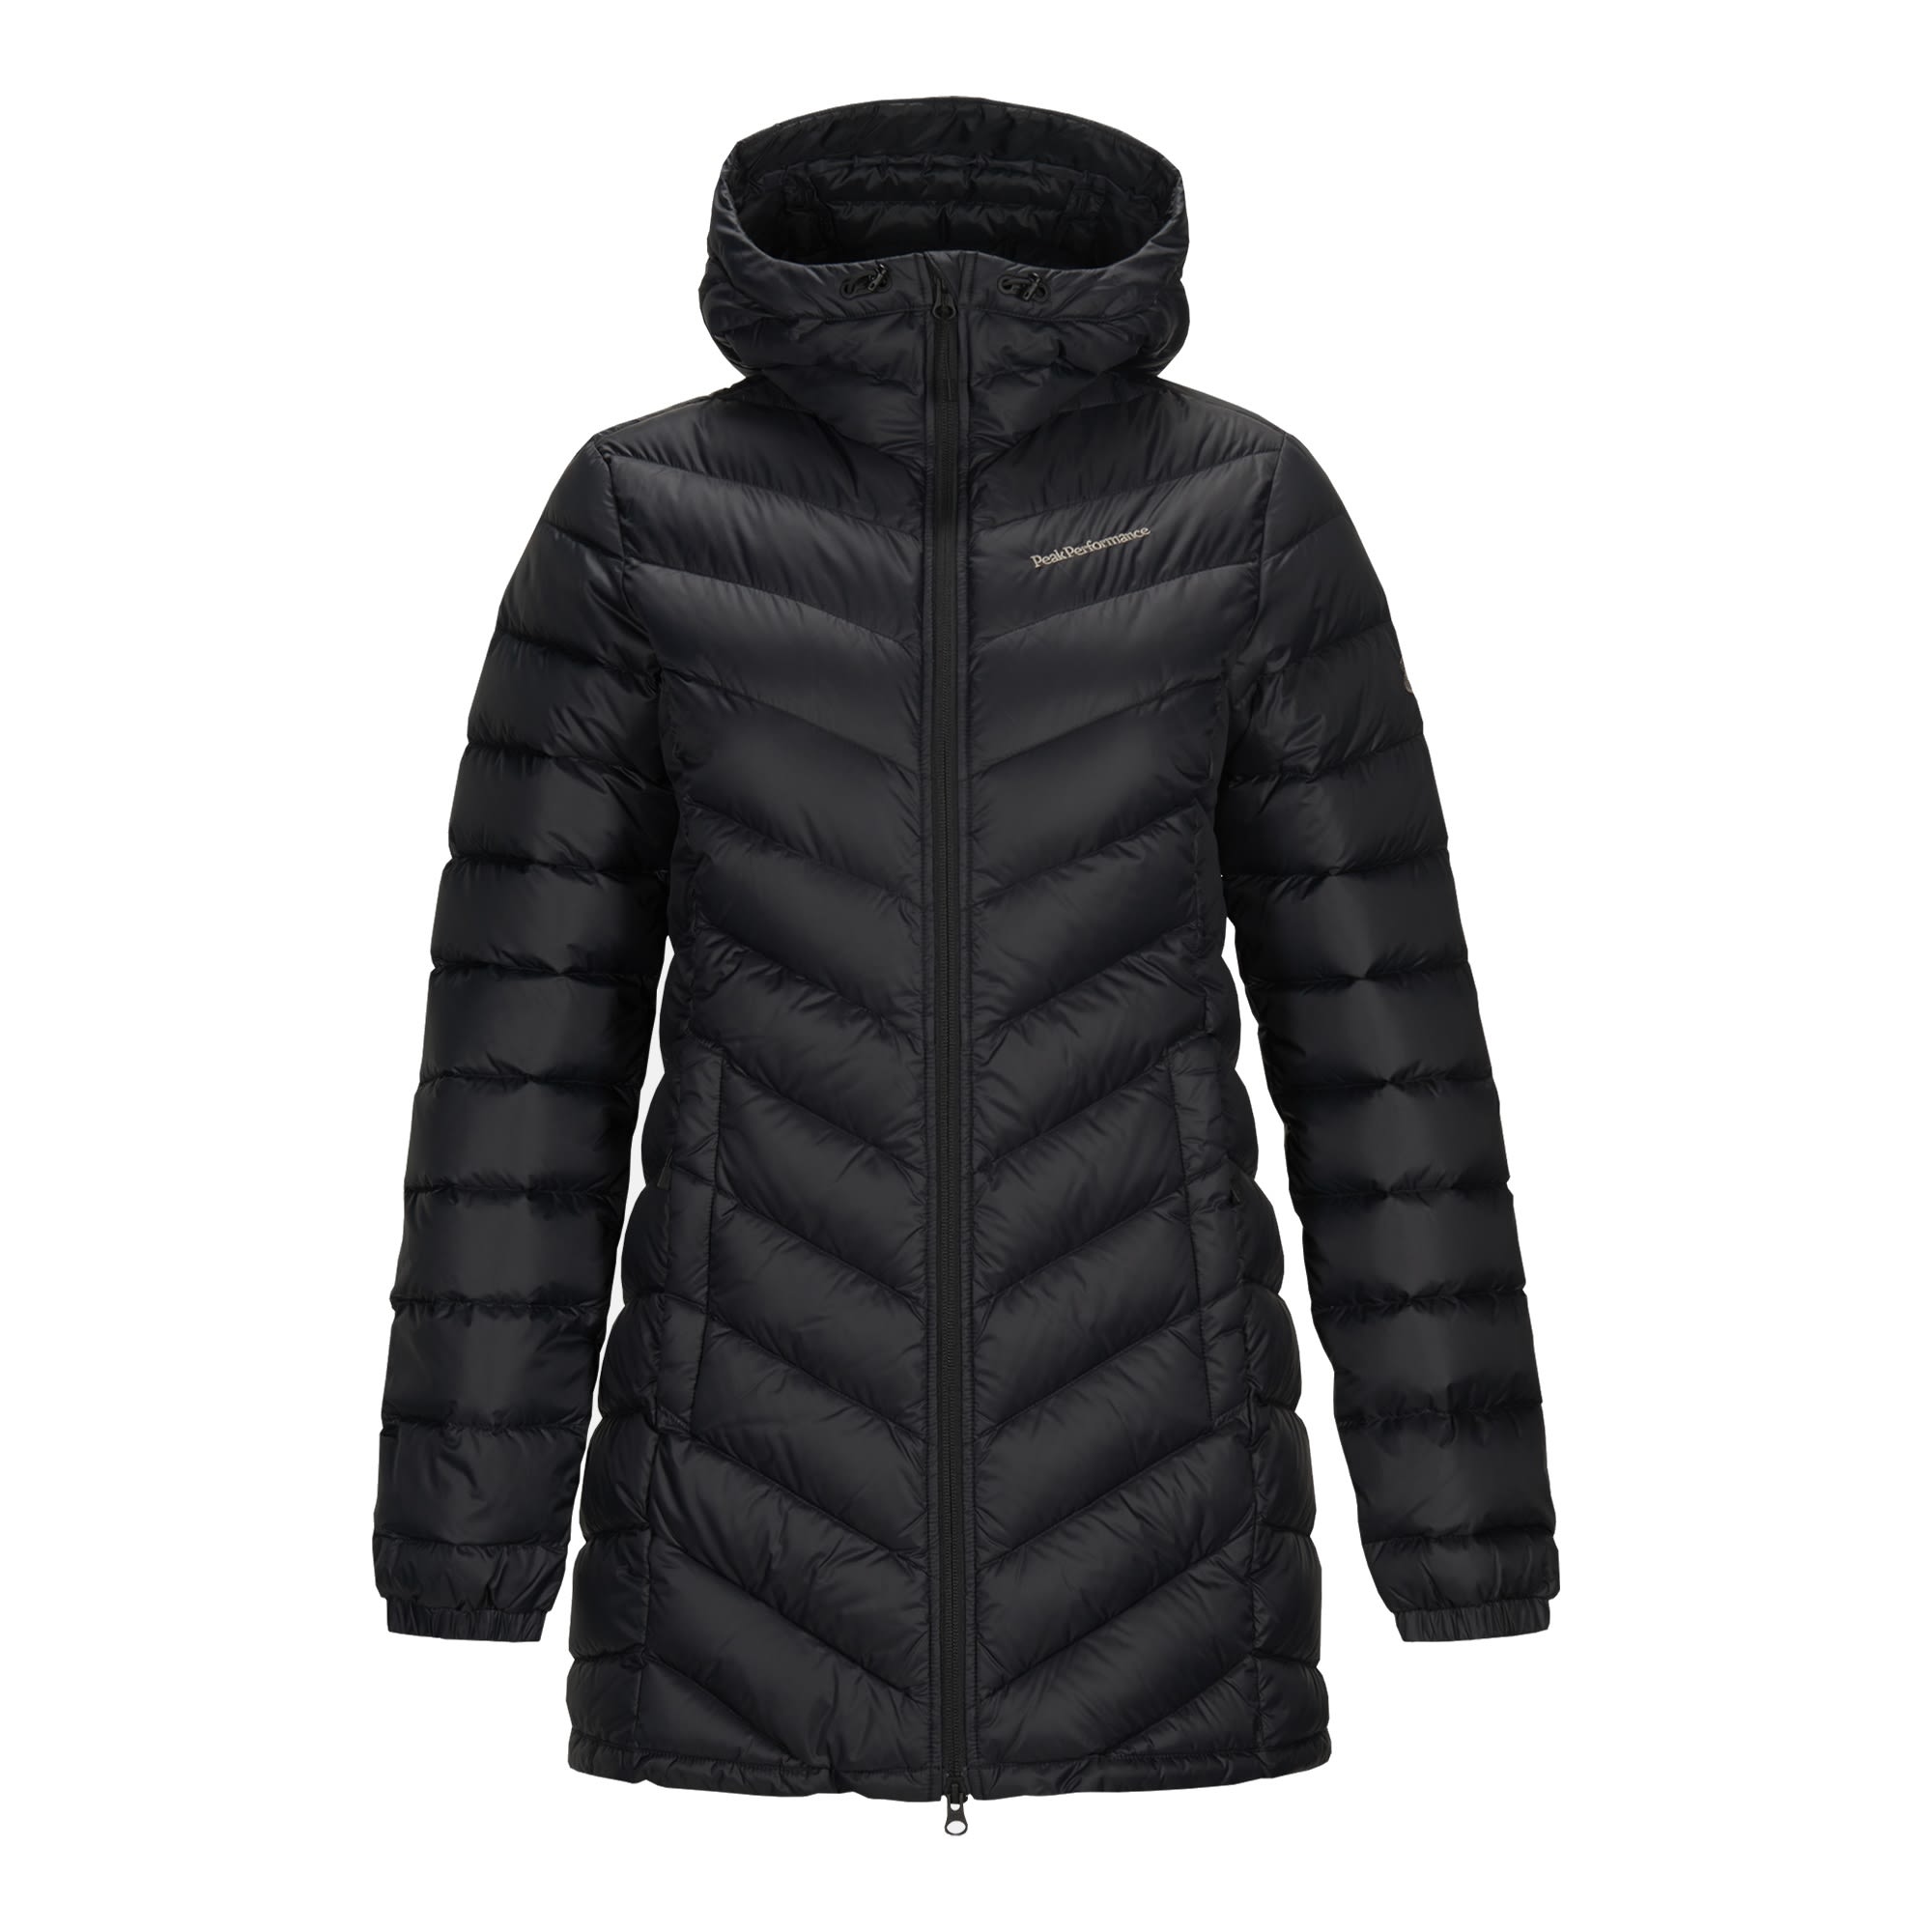 Peak Women's Frost Down Parka from Outnorth